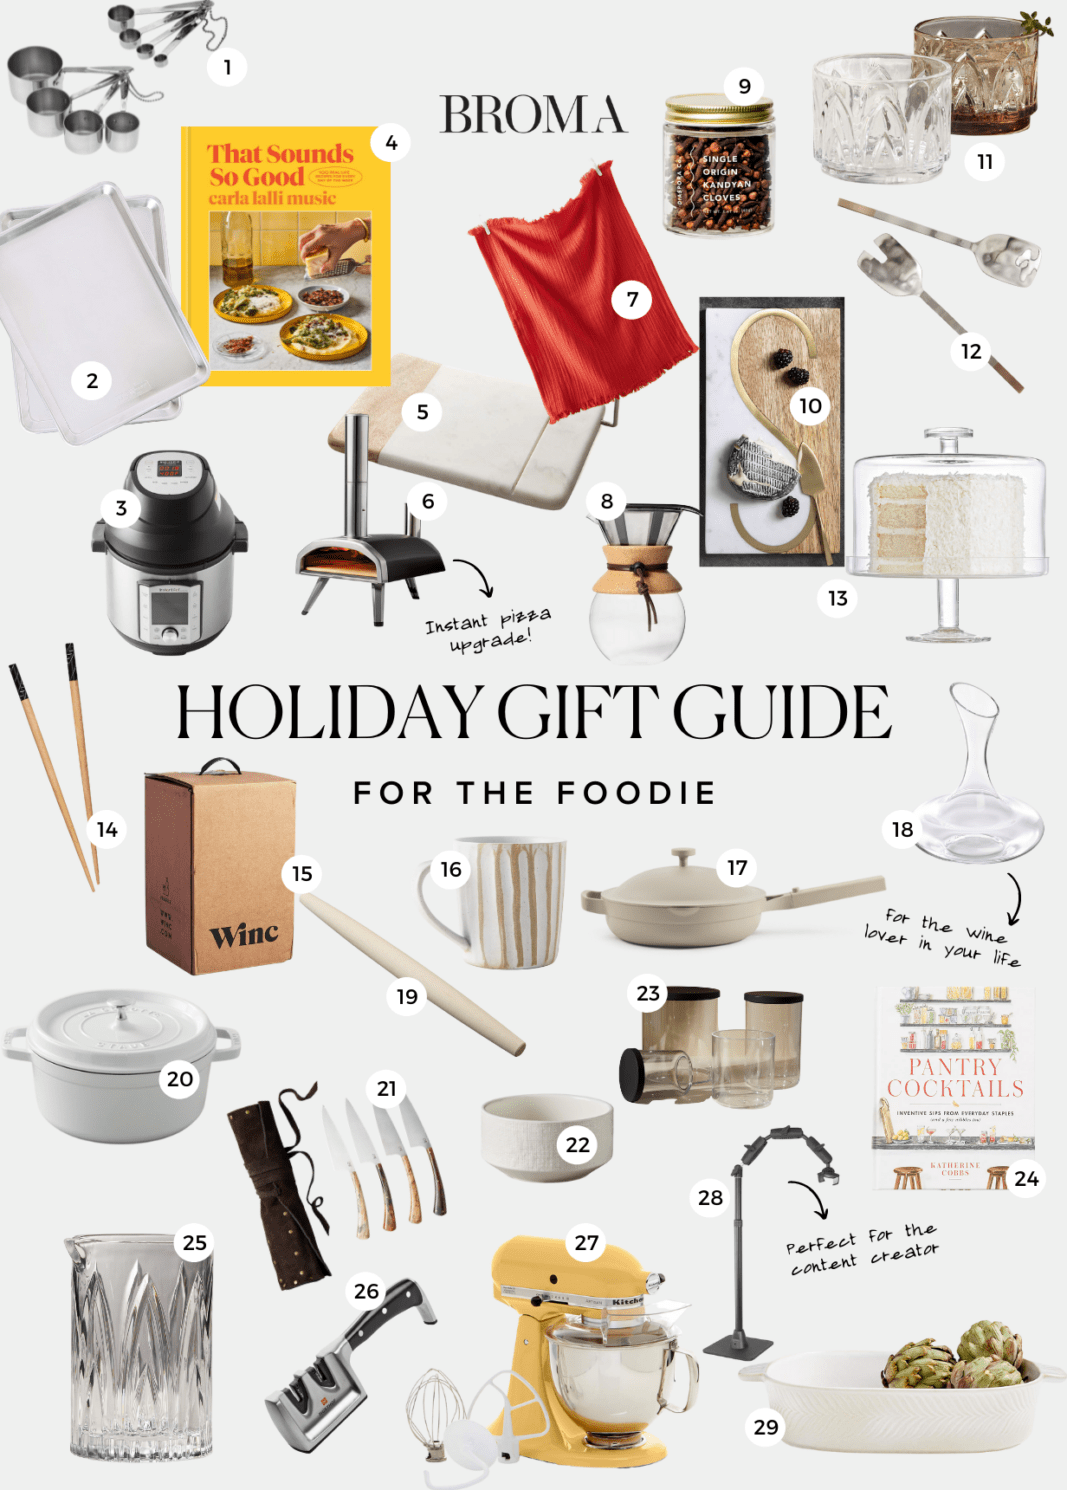 Top kitchen utensils & gadgets to gift a foodie for Christmas 2021